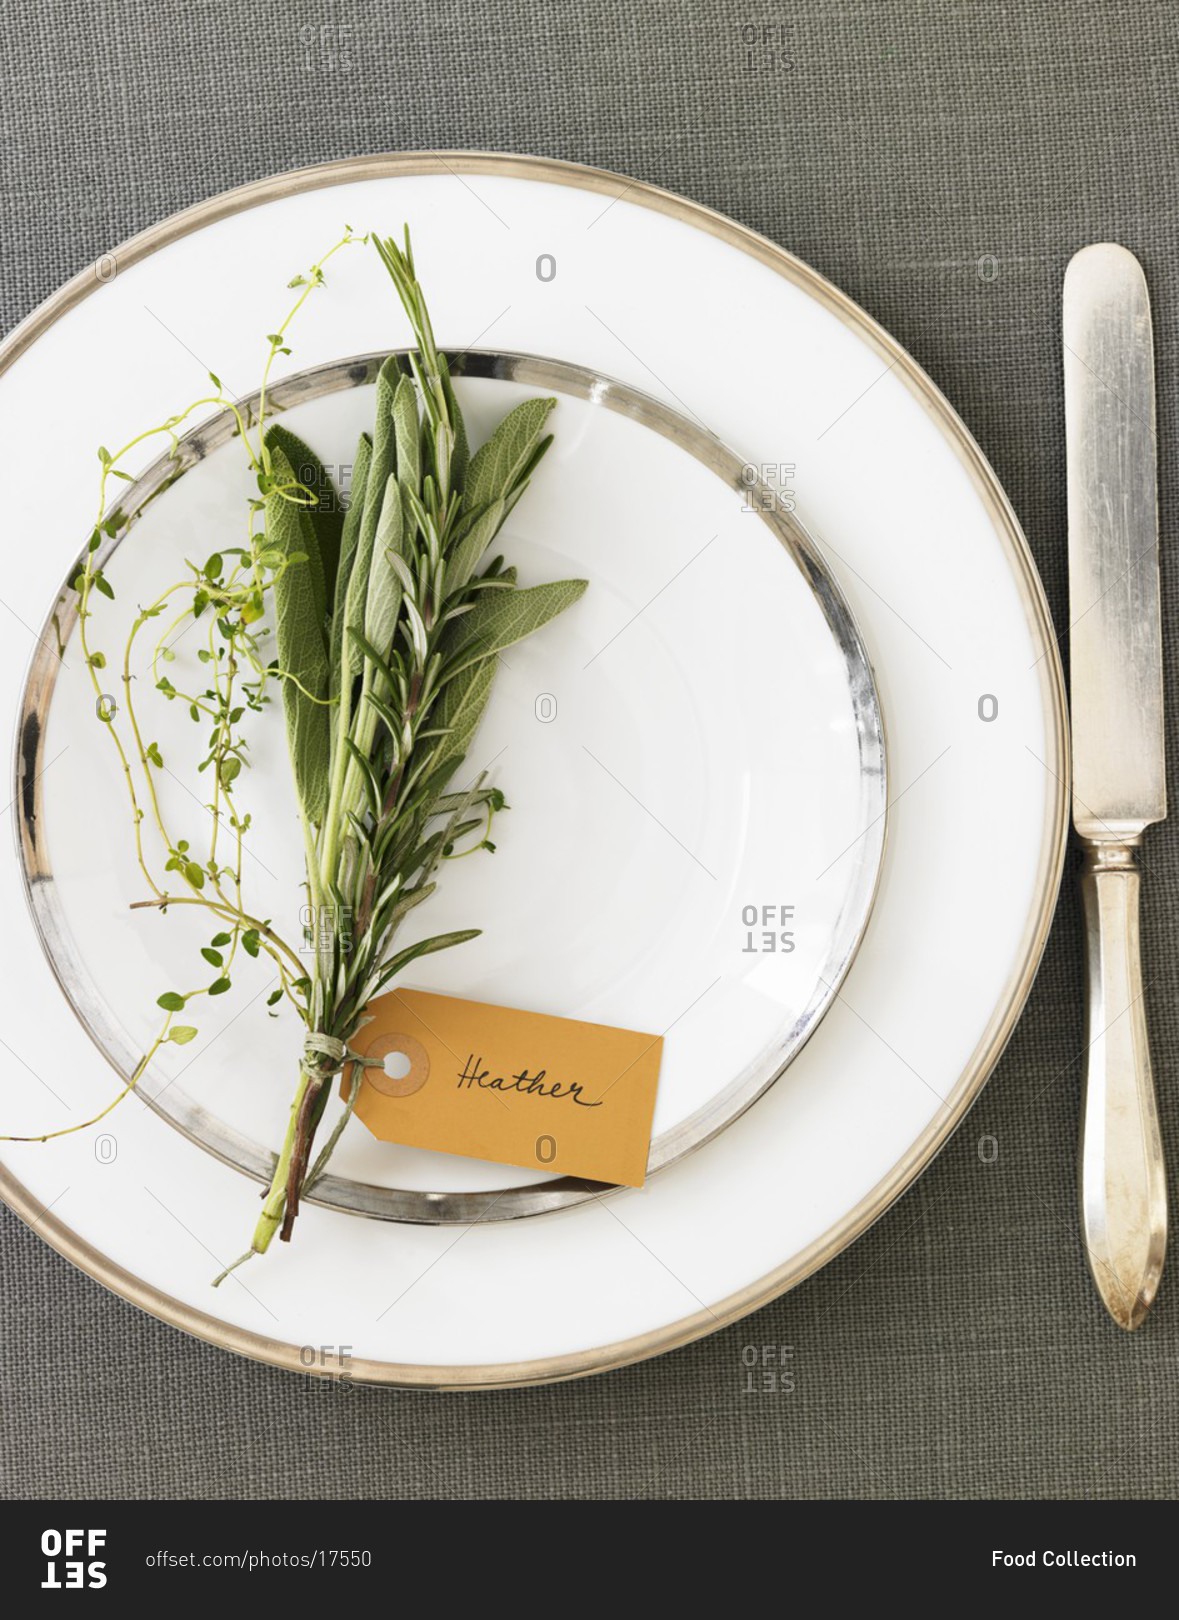 Place Setting with a Bouquet of Herbs and a Name Tag